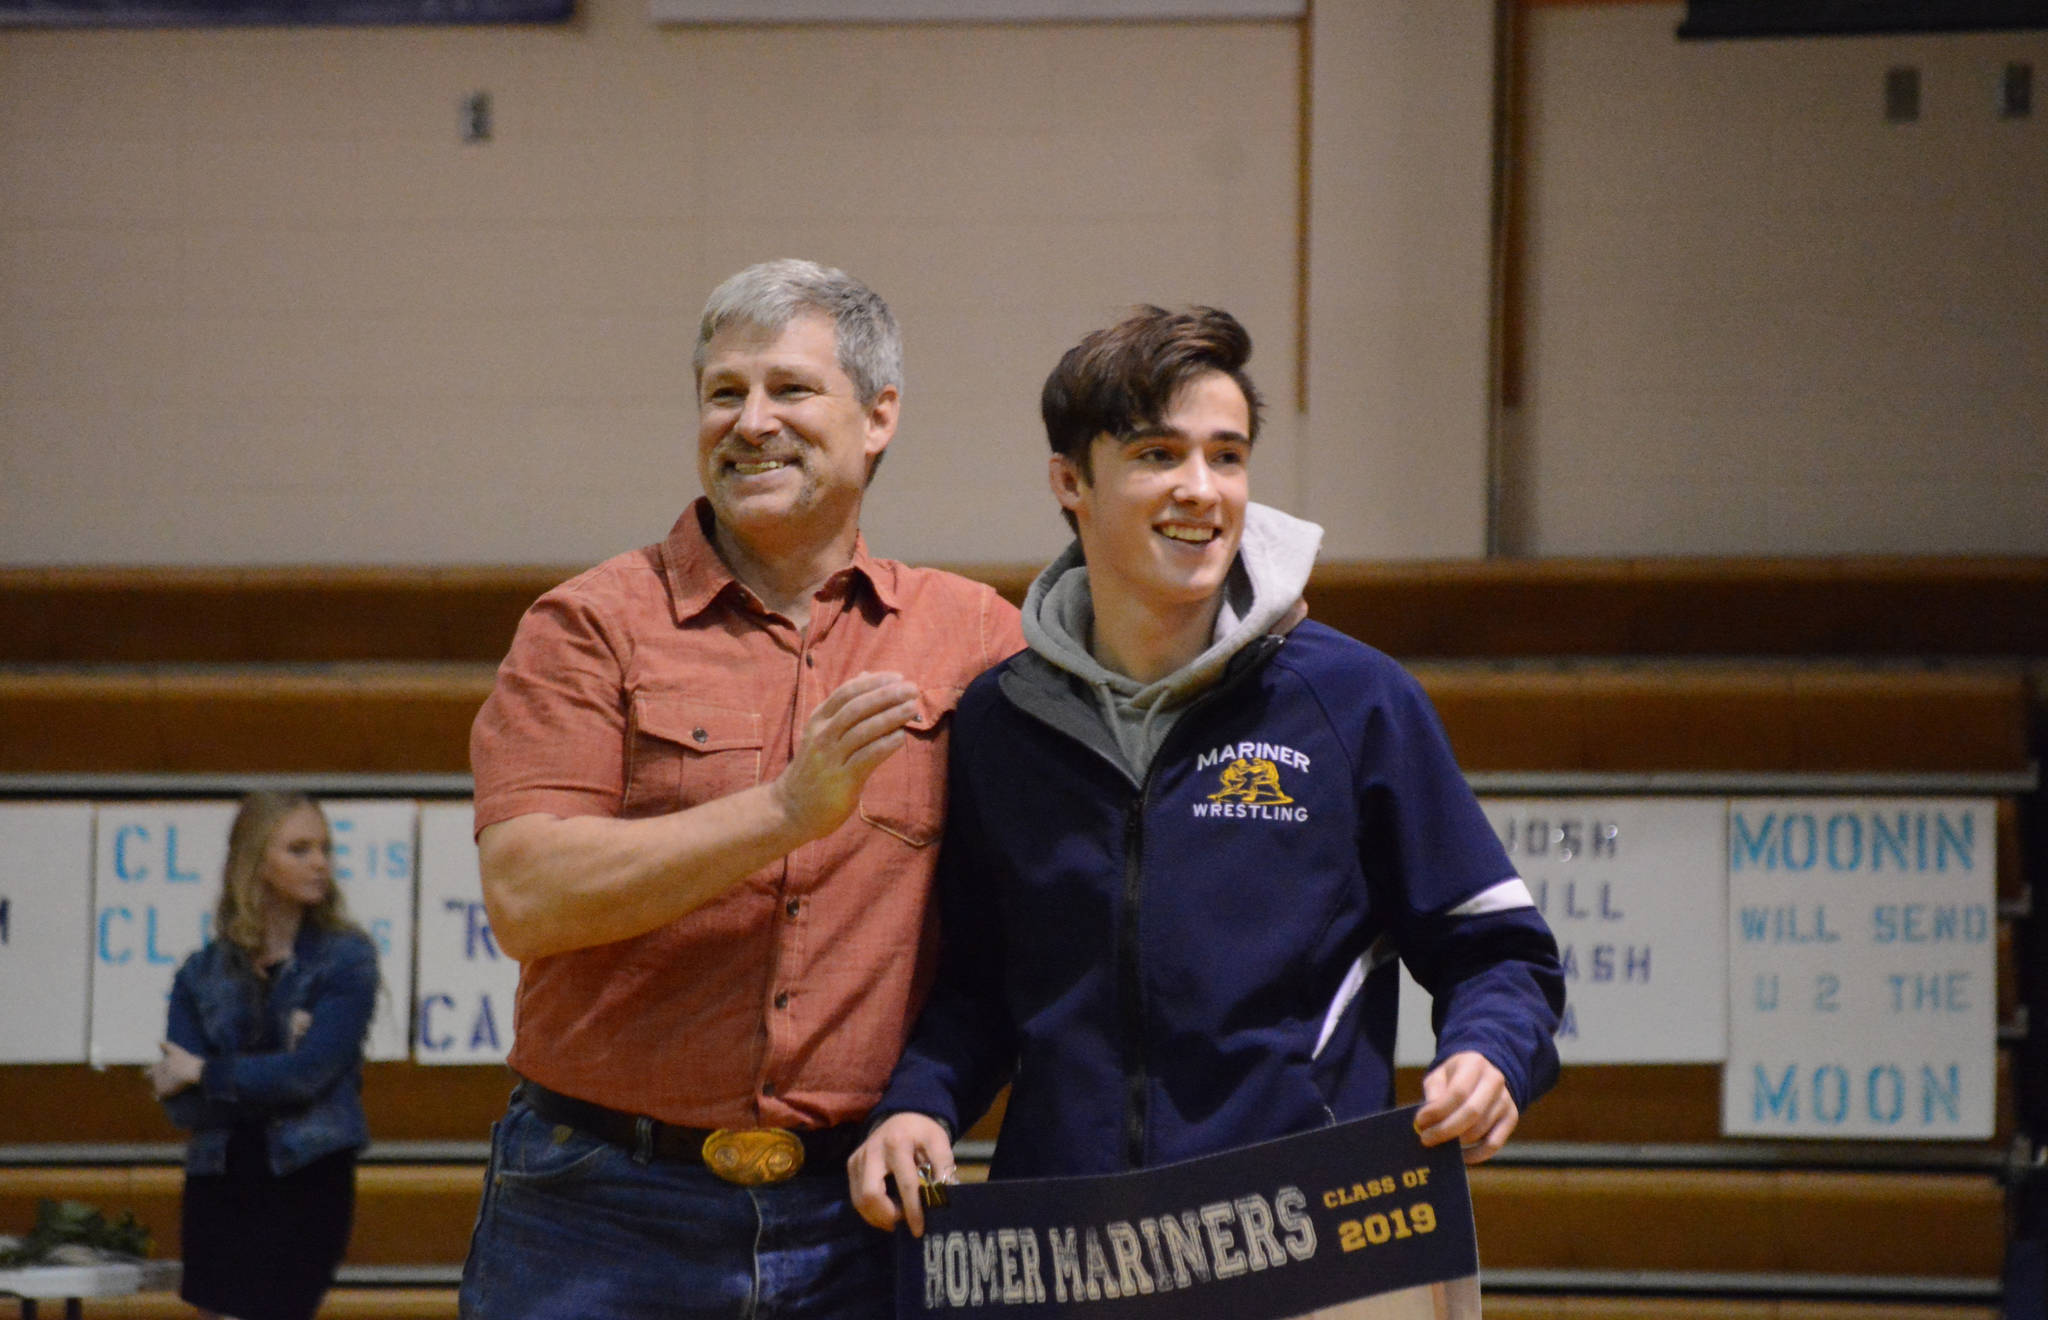 Seth Inama holds a banner recognizing him at Senior Night, the Homer-Kenai dual wrestling meet held Nov. 21, 2018, in the Homer High School Alice Witte Gym, Homer, Alaska. Supporting him is his father, Jay Inama. (Photo by Michael Armstrong/Homer News)